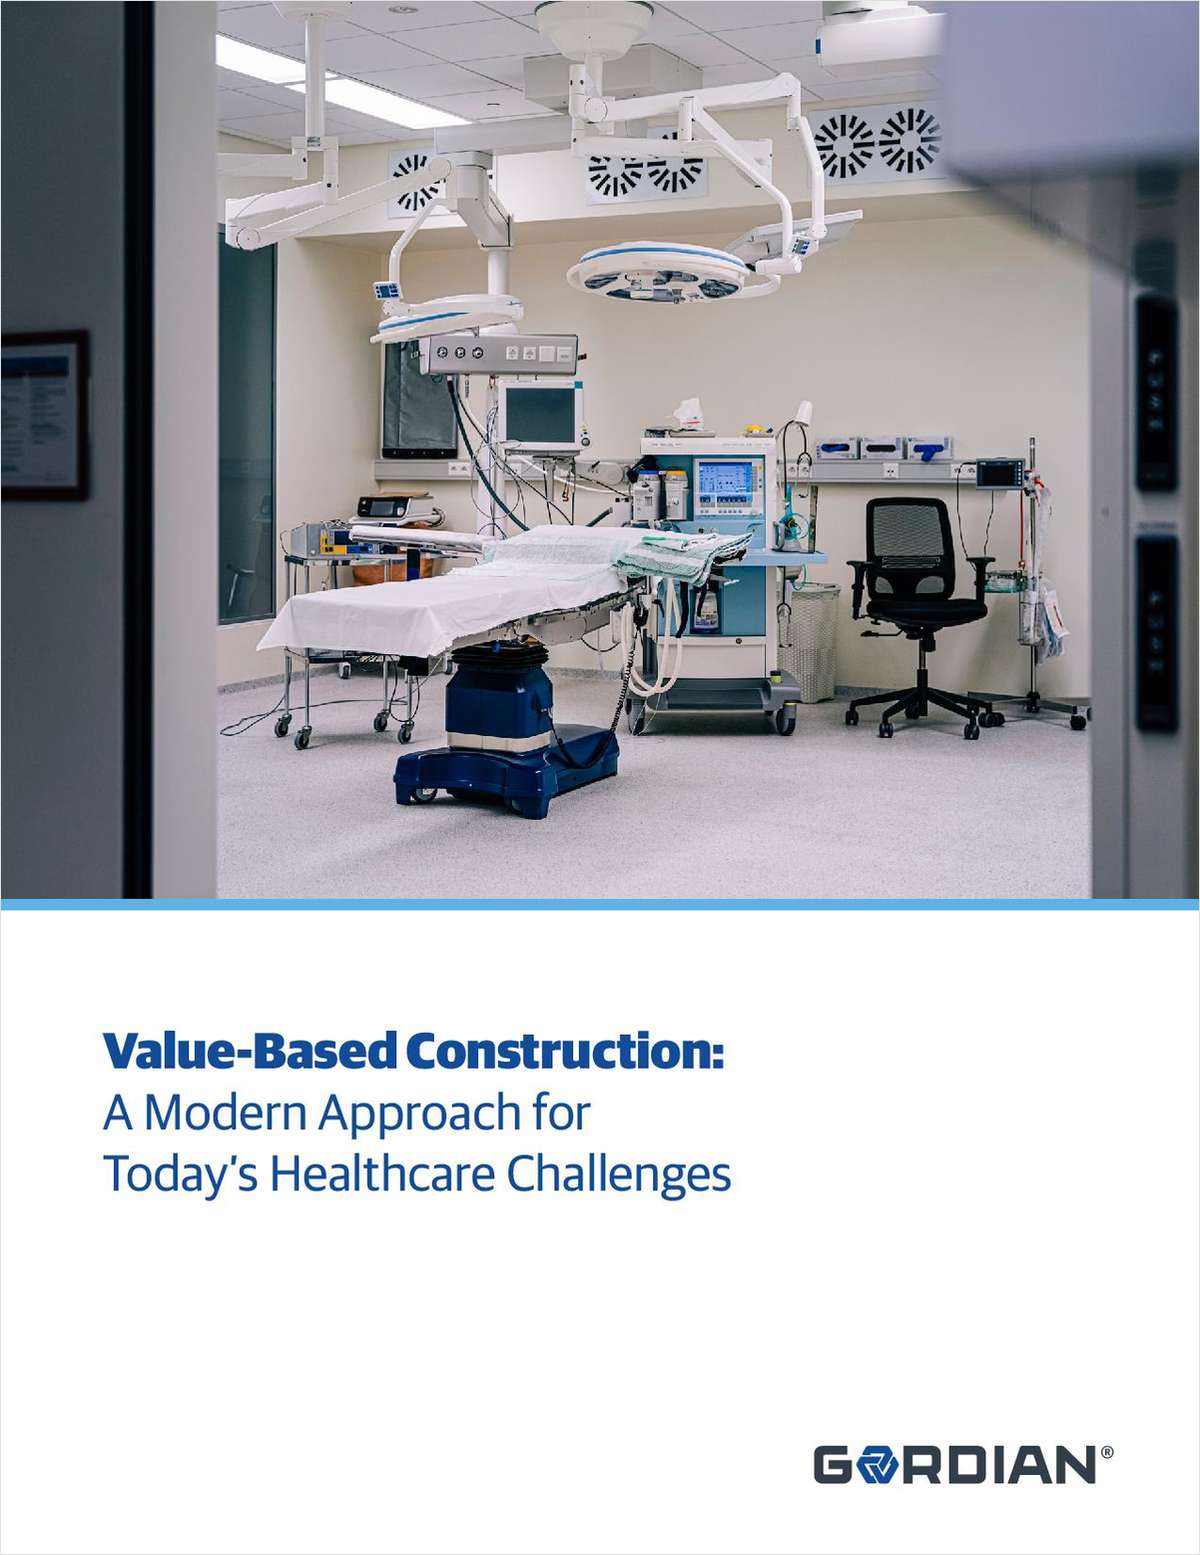 Value-Based Construction: A Modern Approach for Today's Healthcare Challenges